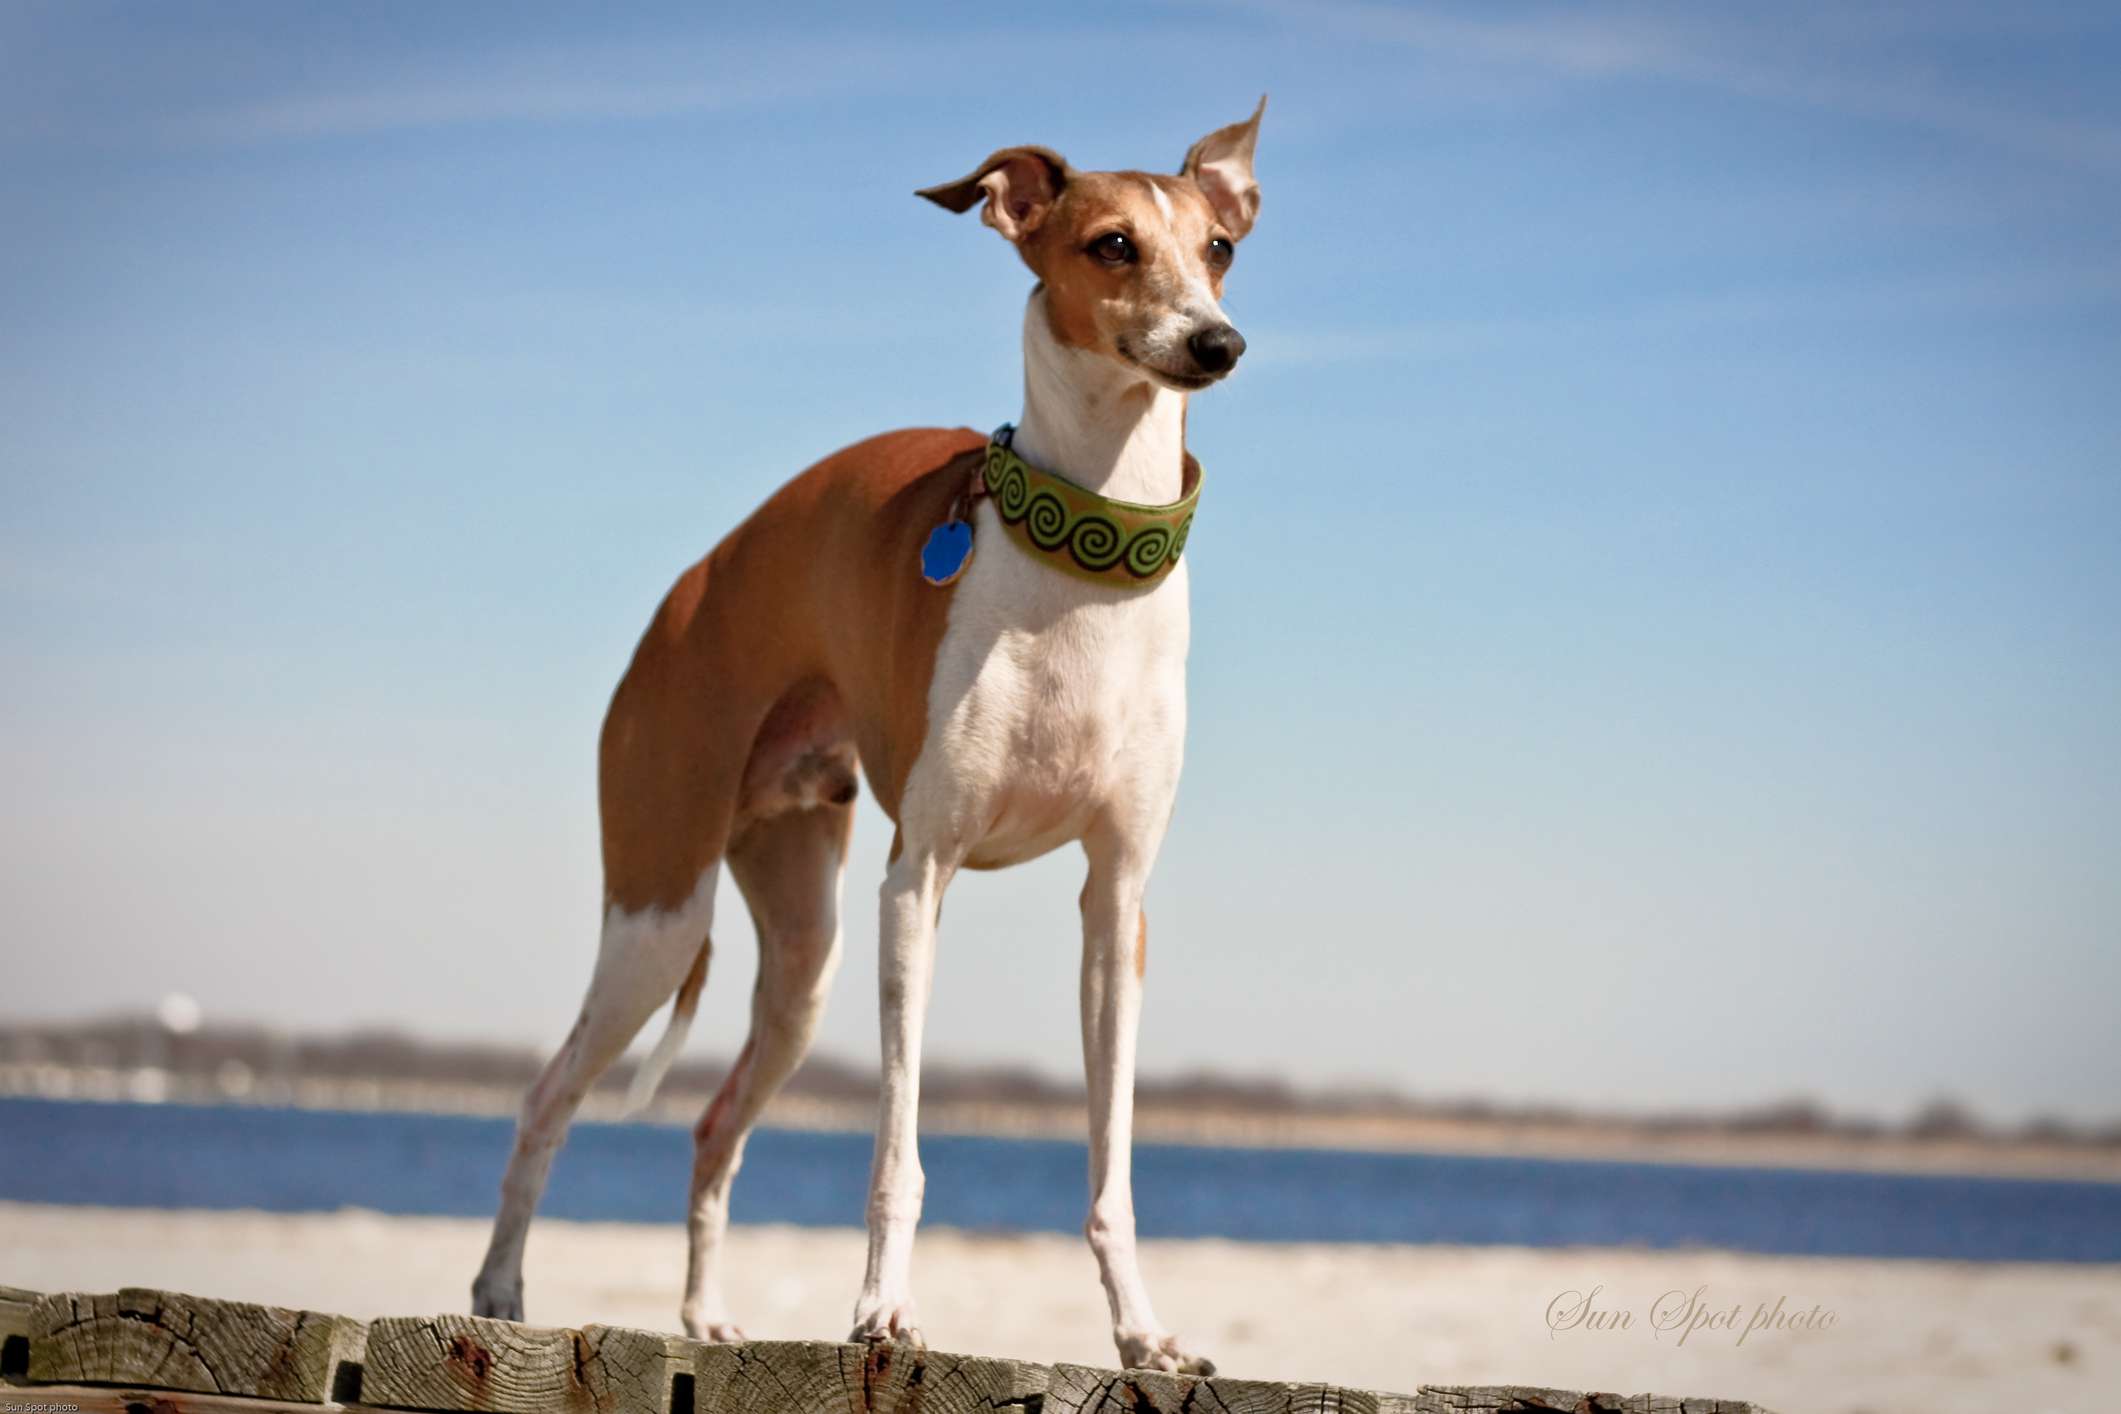 Italian Greyhound standing on pier with lake in background